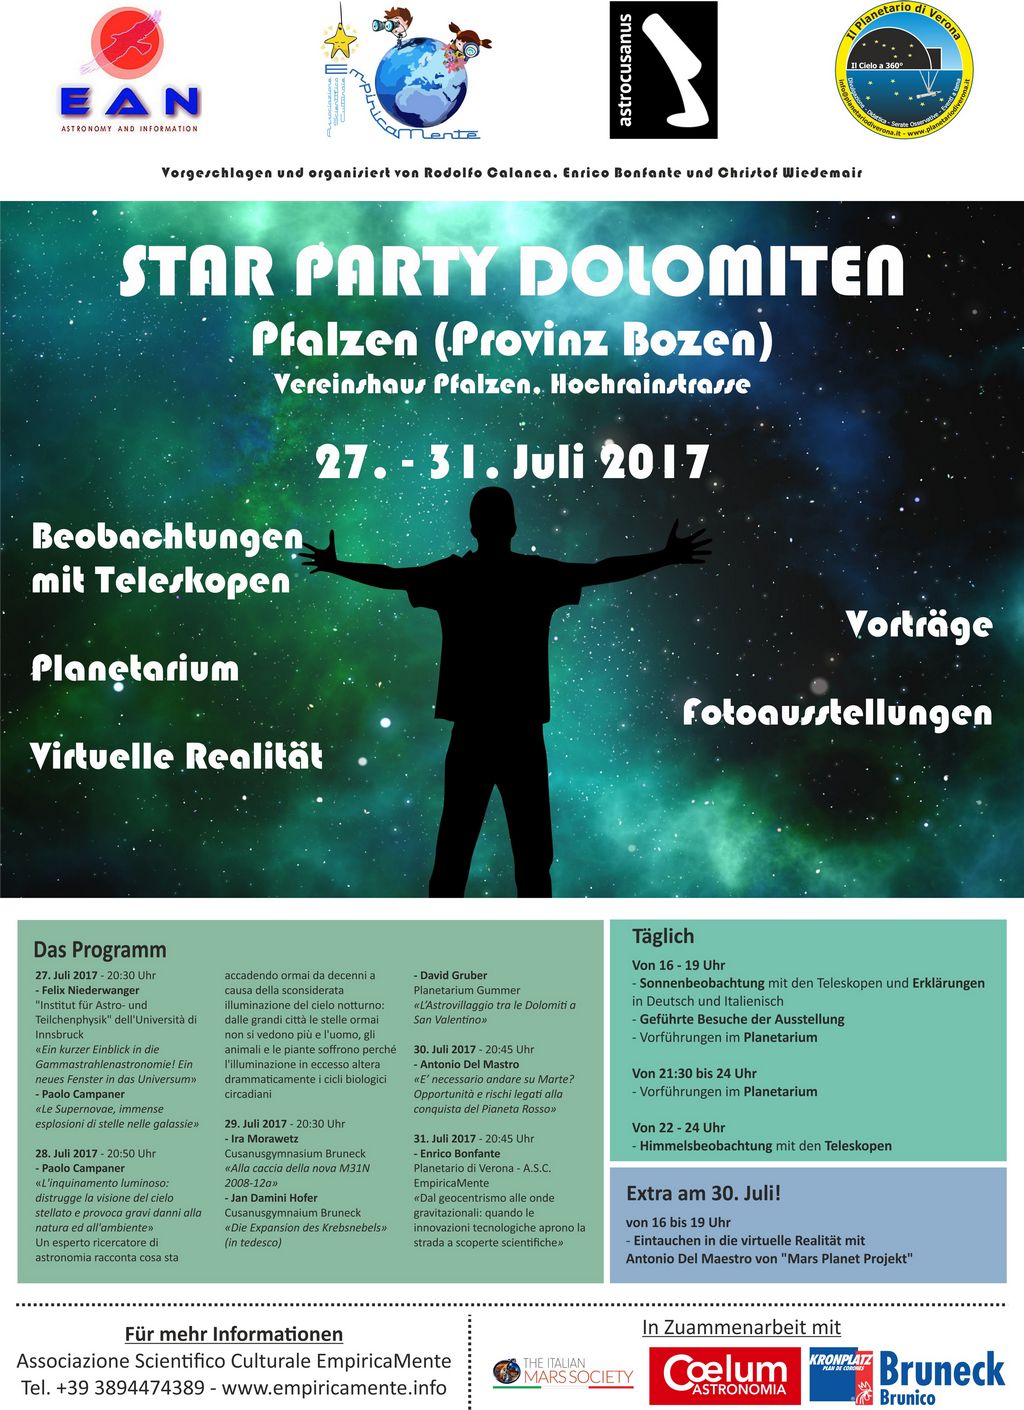 Poster/Invitation of the Star Party